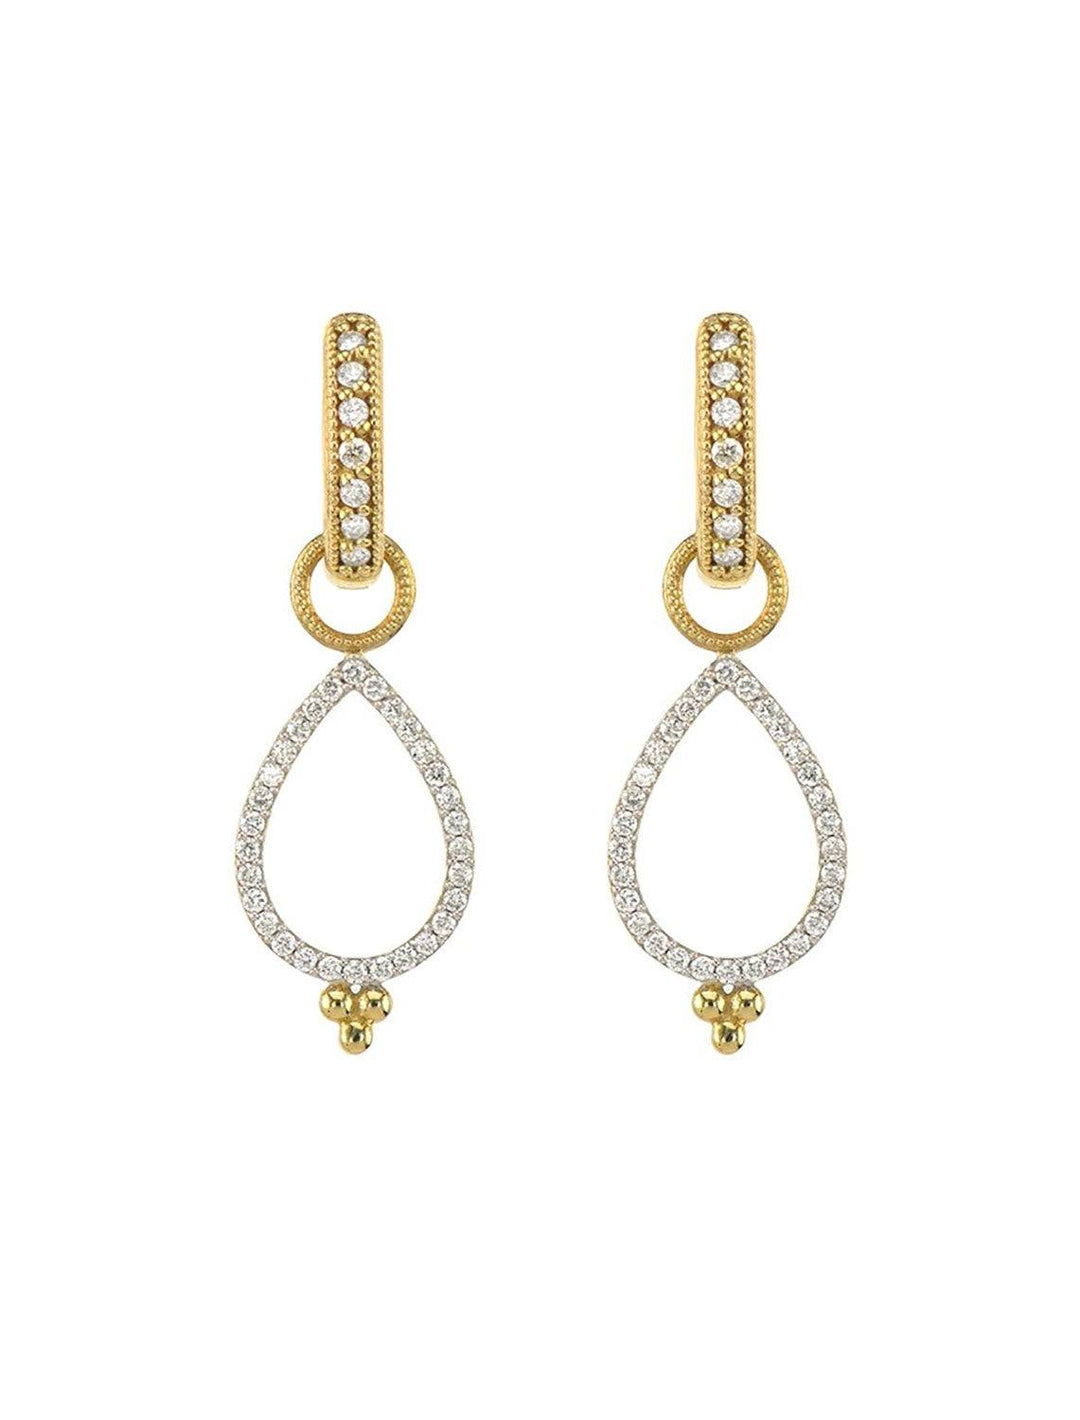 PROVENCE DELICATE OPEN PEAR PAVE EARRING CHARMS